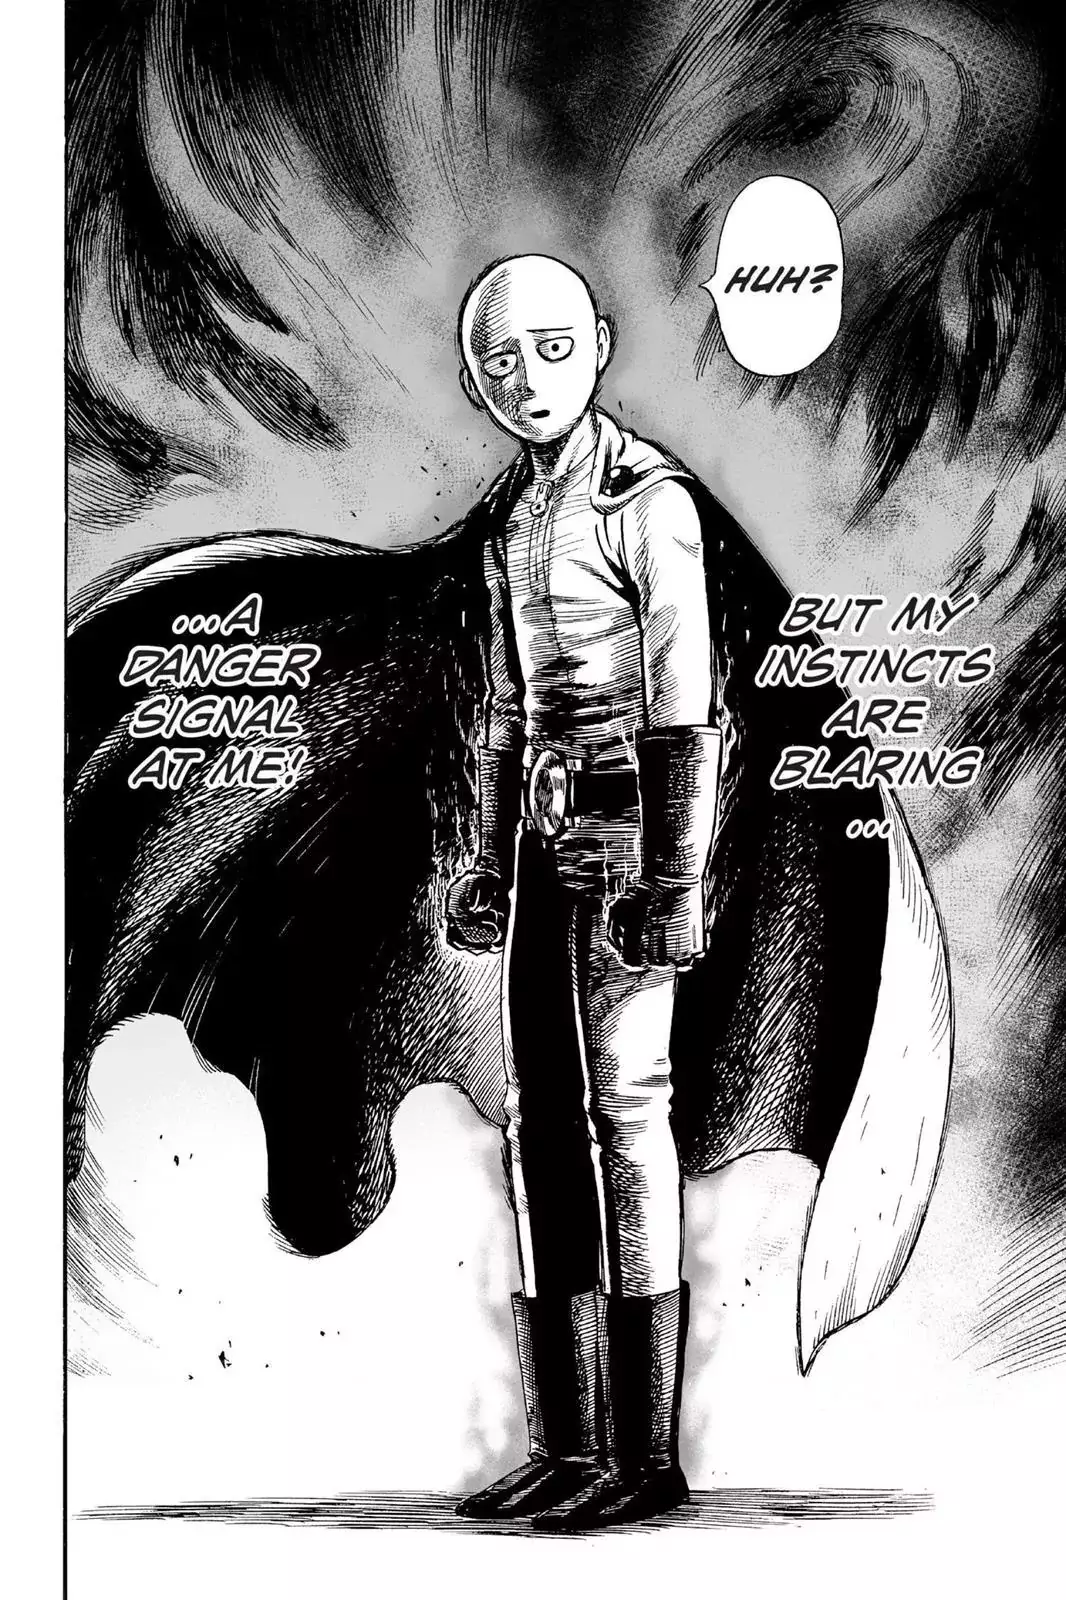 One Punch Man Chapter 10, READ One Punch Man Chapter 10 ONLINE, lost in the cloud genre,lost in the cloud gif,lost in the cloud girl,lost in the cloud goods,lost in the cloud goodreads,lost in the cloud,lost ark cloud gaming,lost odyssey cloud gaming,lost in the cloud fanart,lost in the cloud fanfic,lost in the cloud fandom,lost in the cloud first kiss,lost in the cloud font,lost in the cloud ending,lost in the cloud episode 97,lost in the cloud edit,lost in the cloud explained,lost in the cloud dog,lost in the cloud discord server,lost in the cloud desktop wallpaper,lost in the cloud drawing,can't find my cloud on network,lost in the cloud characters,lost in the cloud chapter 93 release date,lost in the cloud birthday,lost in the cloud birthday art,lost in the cloud background,lost in the cloud banner,lost in the clouds meaning,what is the black cloud in lost,lost in the cloud ao3,lost in the cloud anime,lost in the cloud art,lost in the cloud author twitter,lost in the cloud author instagram,lost in the cloud artist,lost in the cloud acrylic stand,lost in the cloud artist twitter,lost in the cloud art style,lost in the cloud analysis